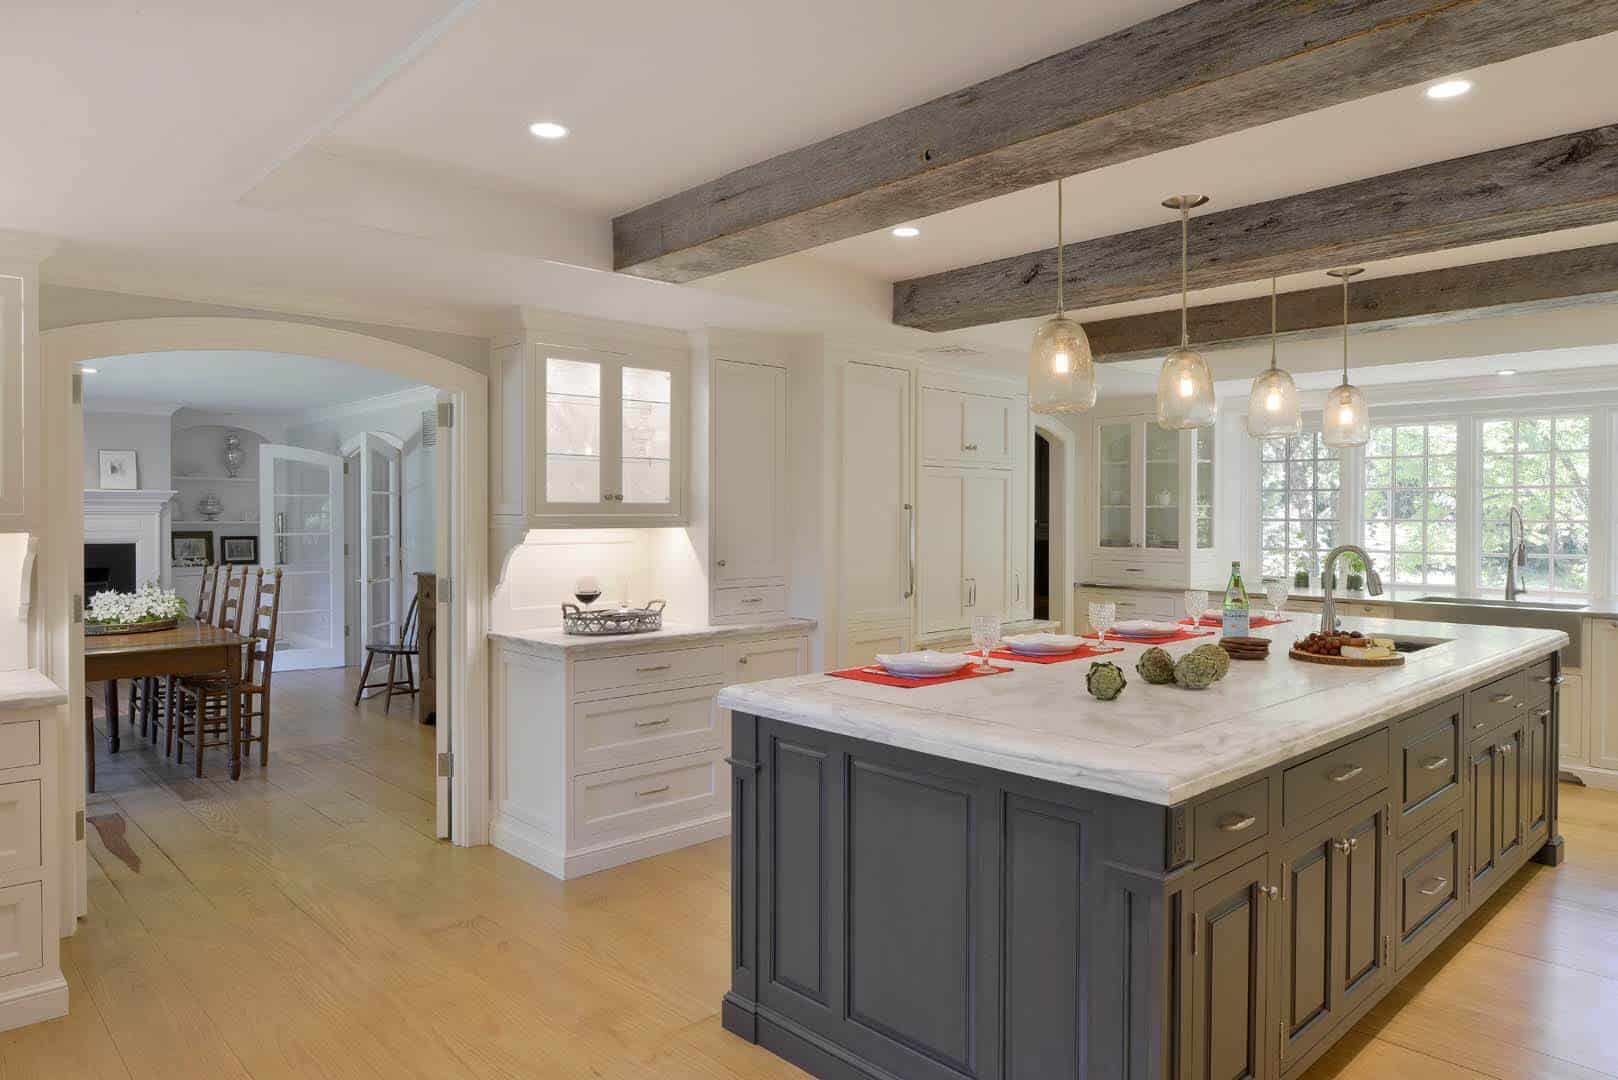 Expansive kitchen features exposed beams, white Bilotta cabinetry and large gray island with marble top.